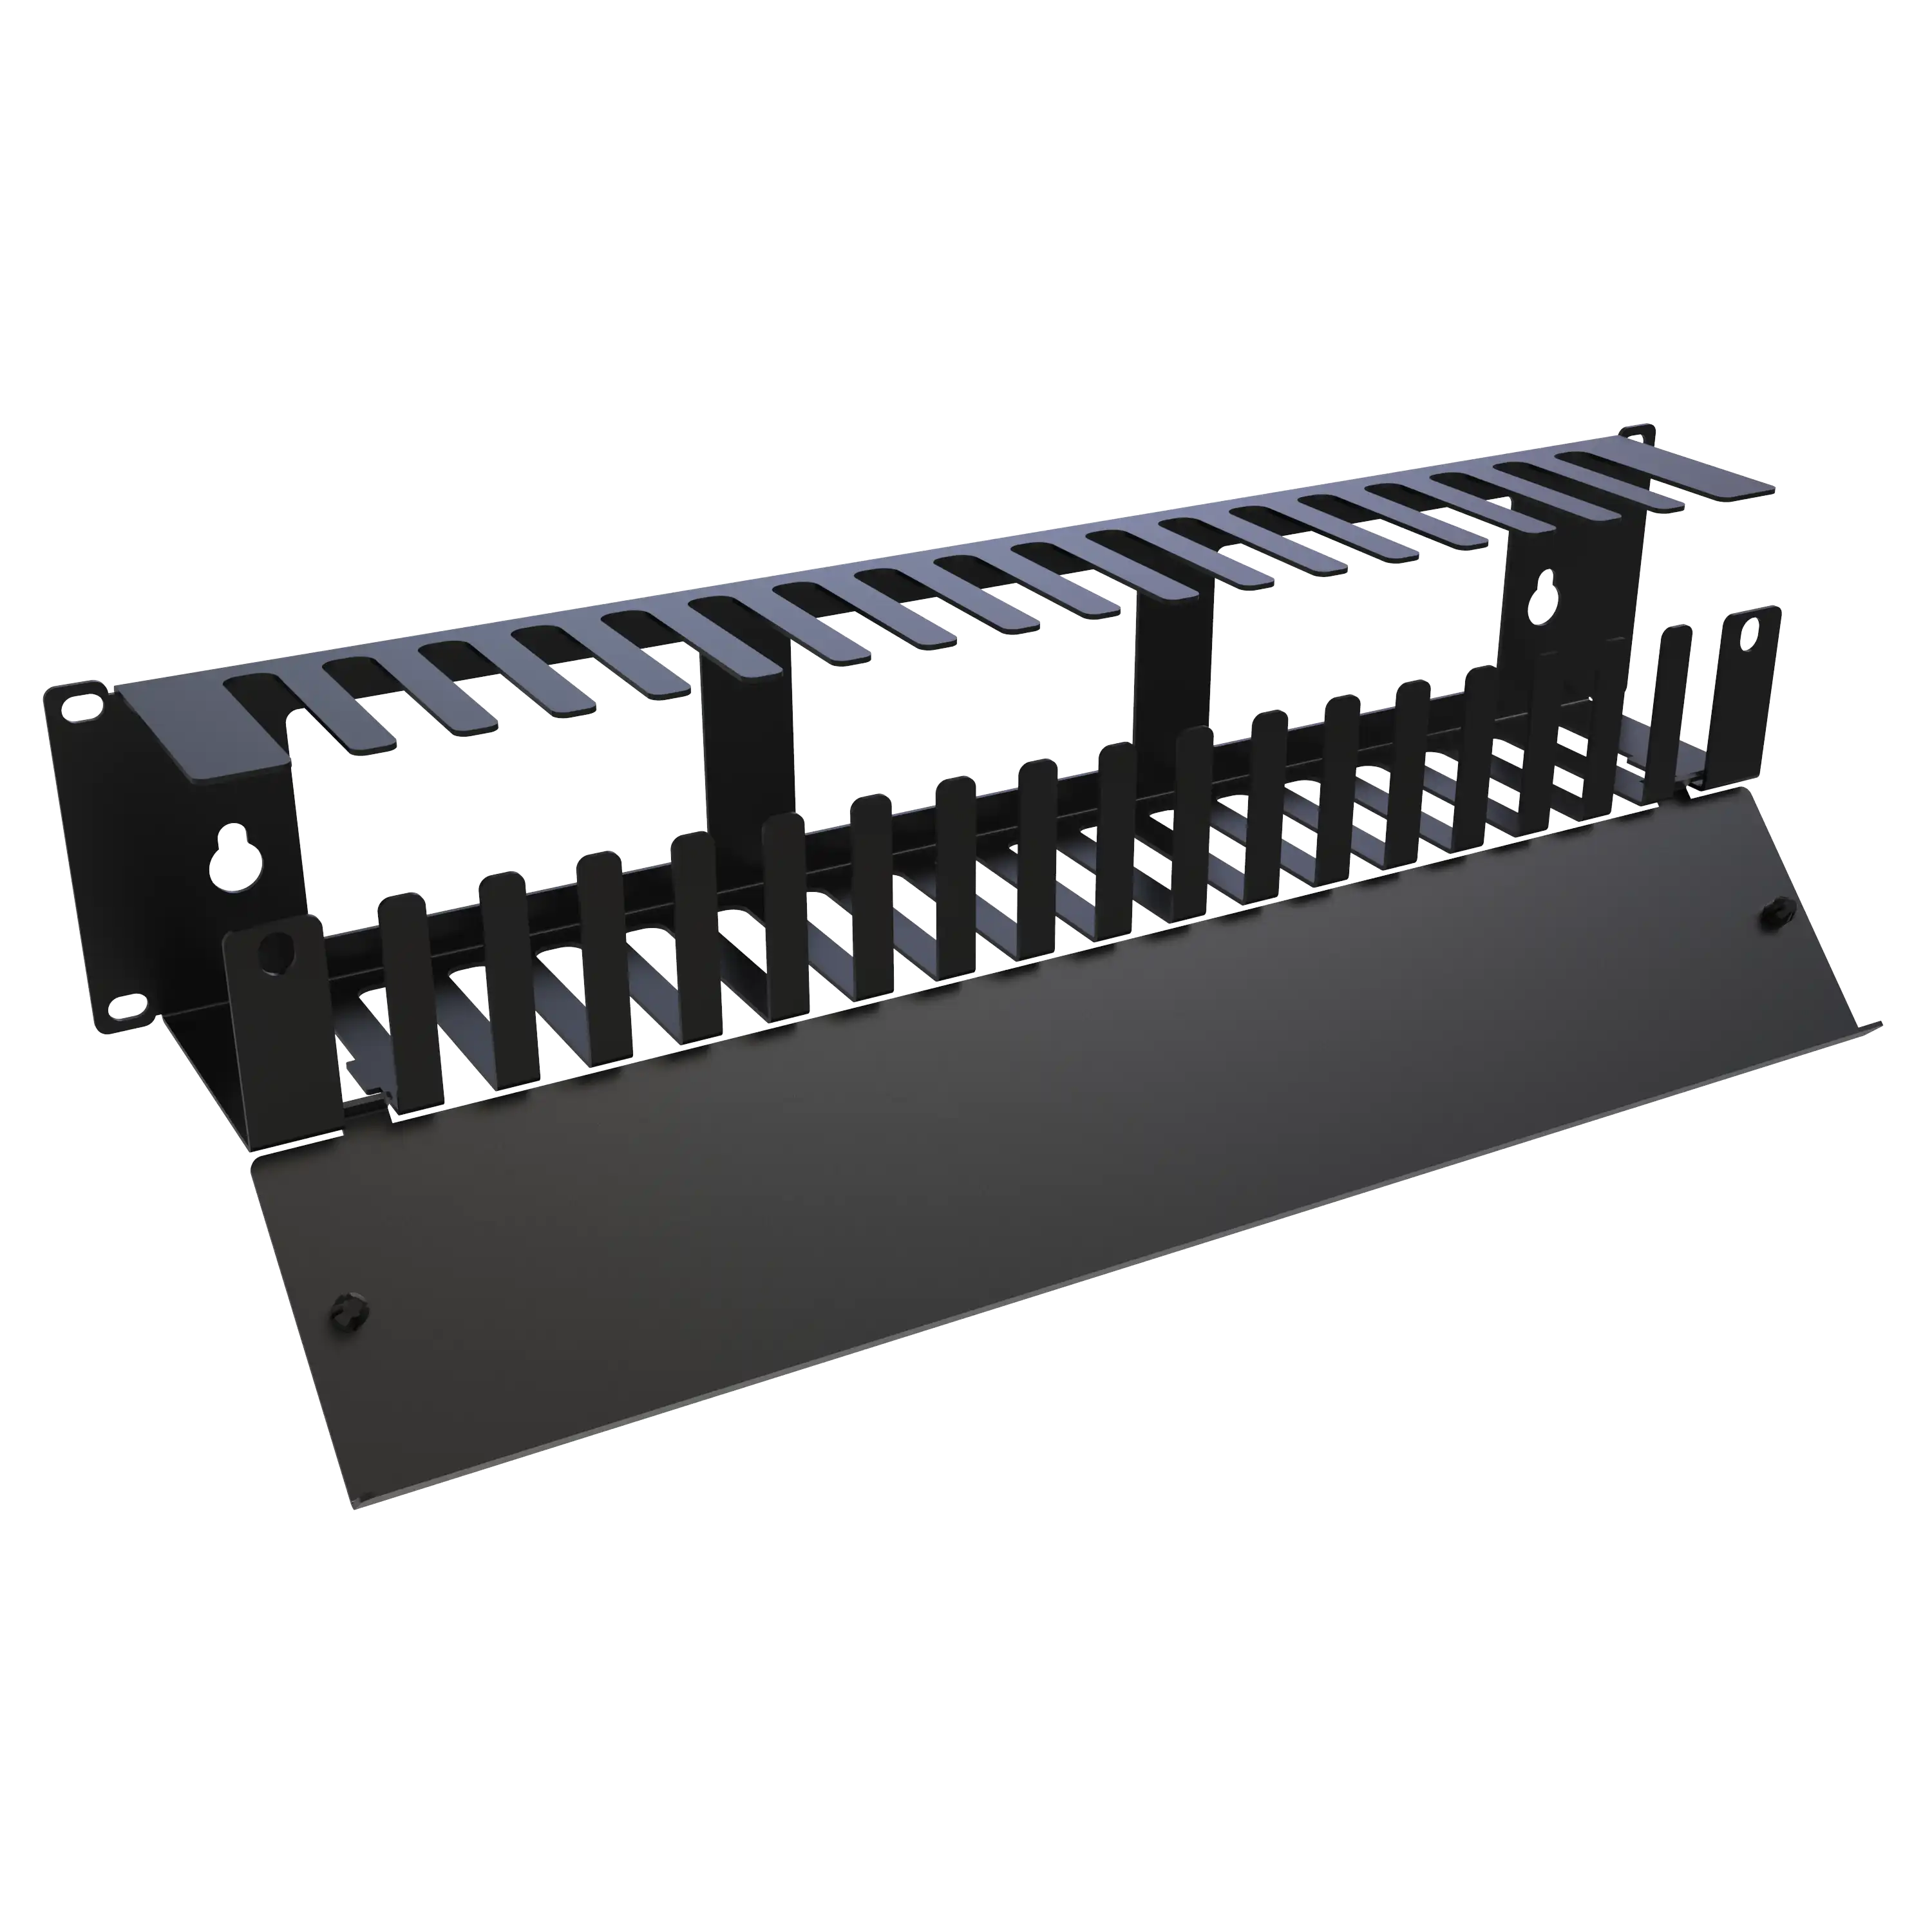 RB-HSF Series - Hammond Manufacturing Rack Systems at KGA Enclosures Ltd